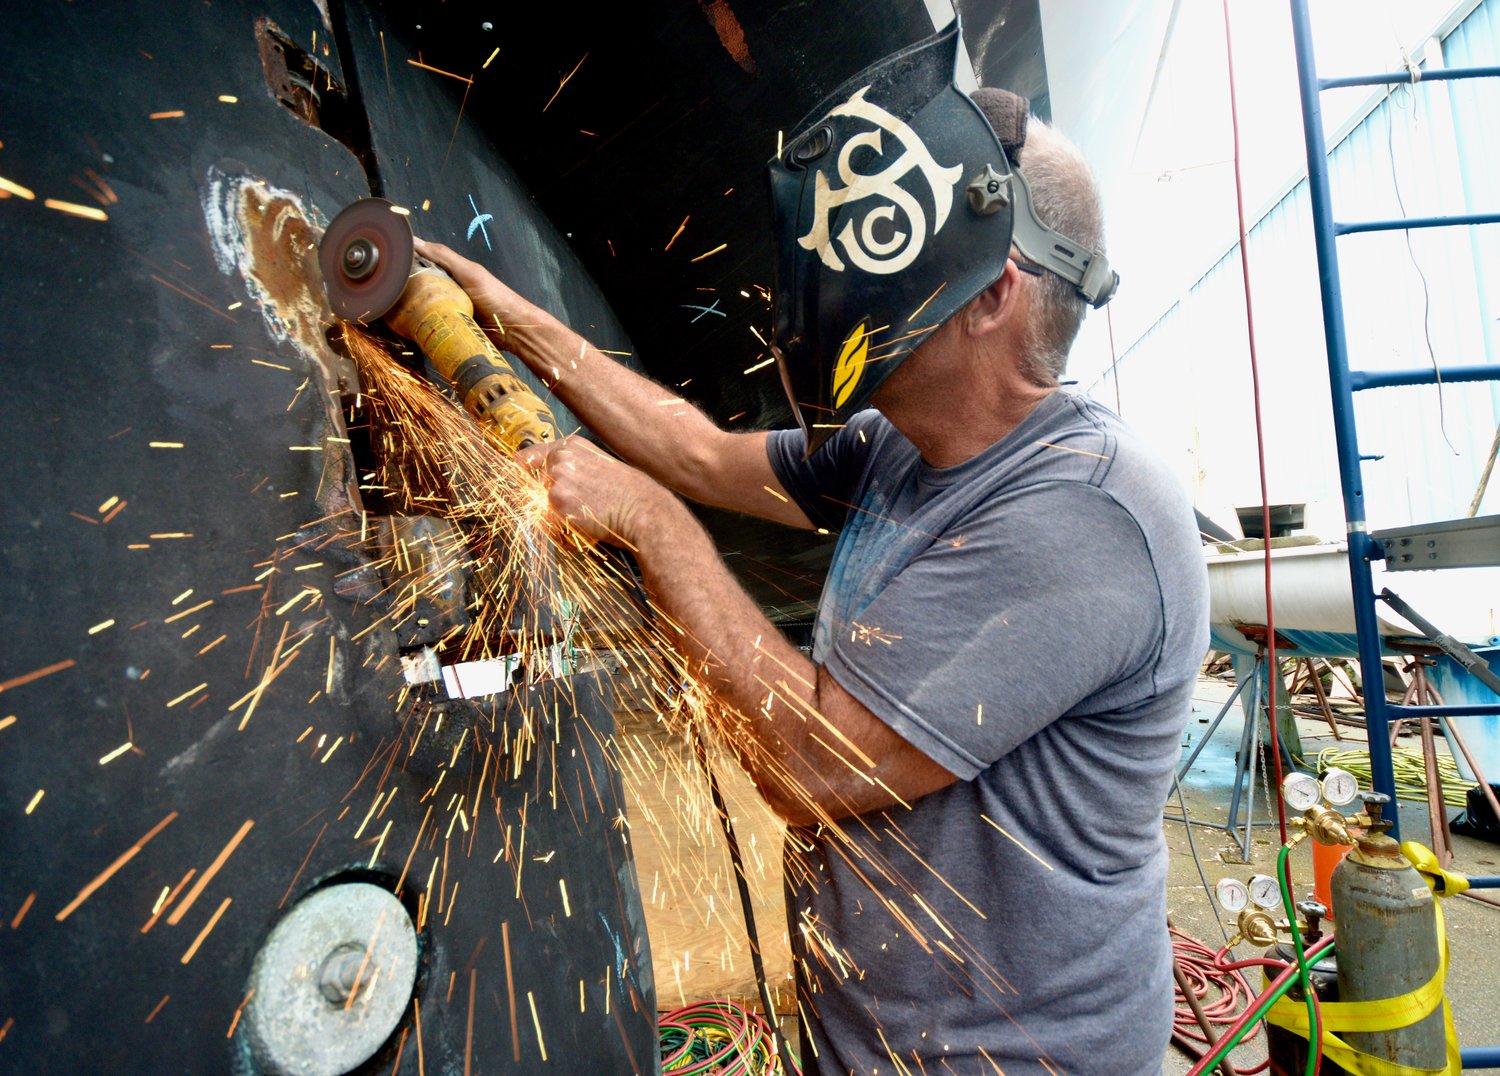 Sparks fly as owner Ty Fields cuts along one of Pacific Star’s rudders that needed to be dropped during restoration work at Hinckley Boat Yard last week.